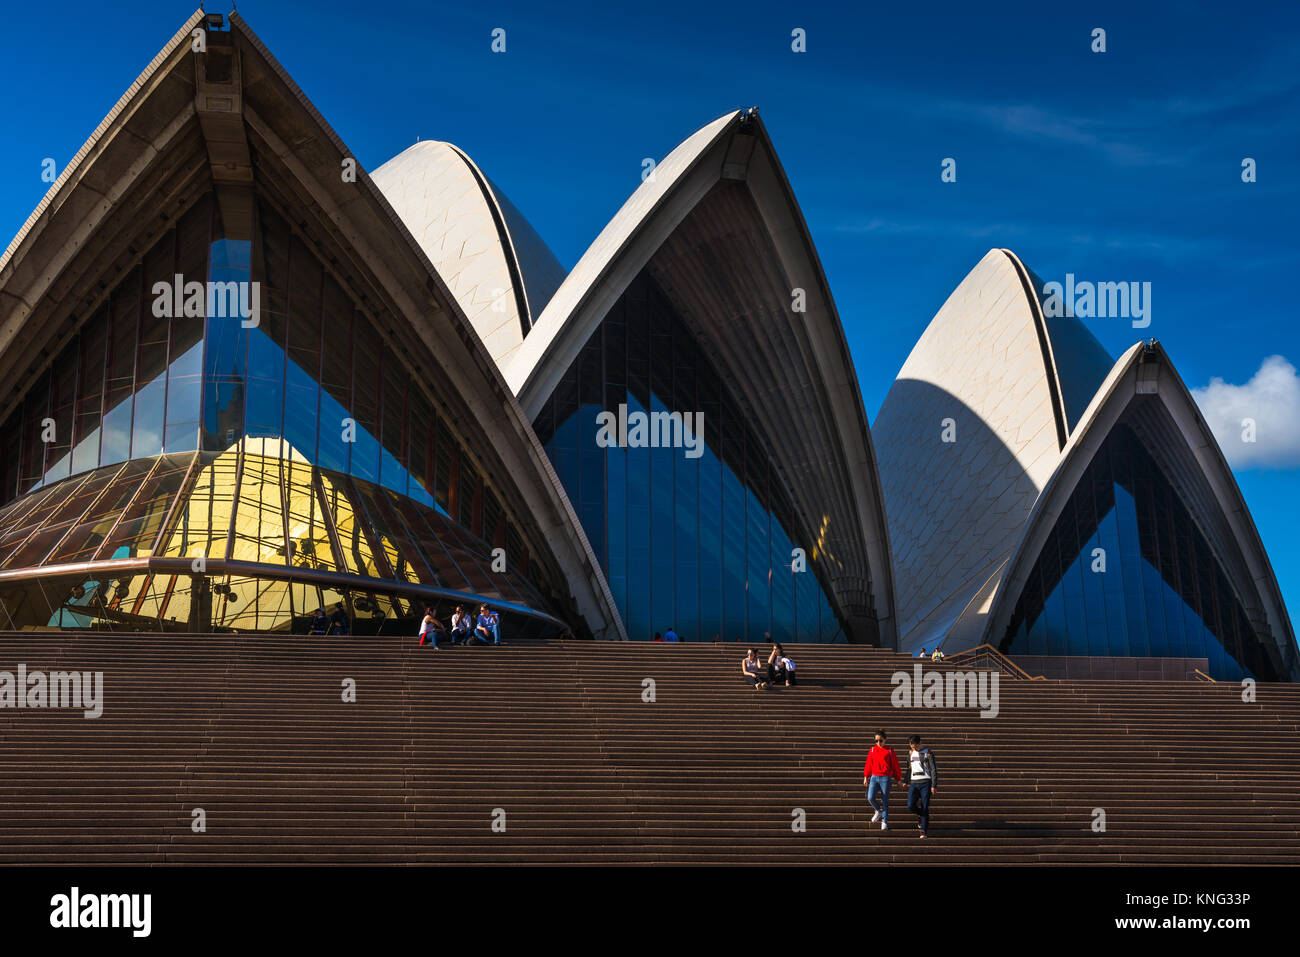 Iconic Sydney Opera House, front view. New South Wales, Australia. Stock Photo